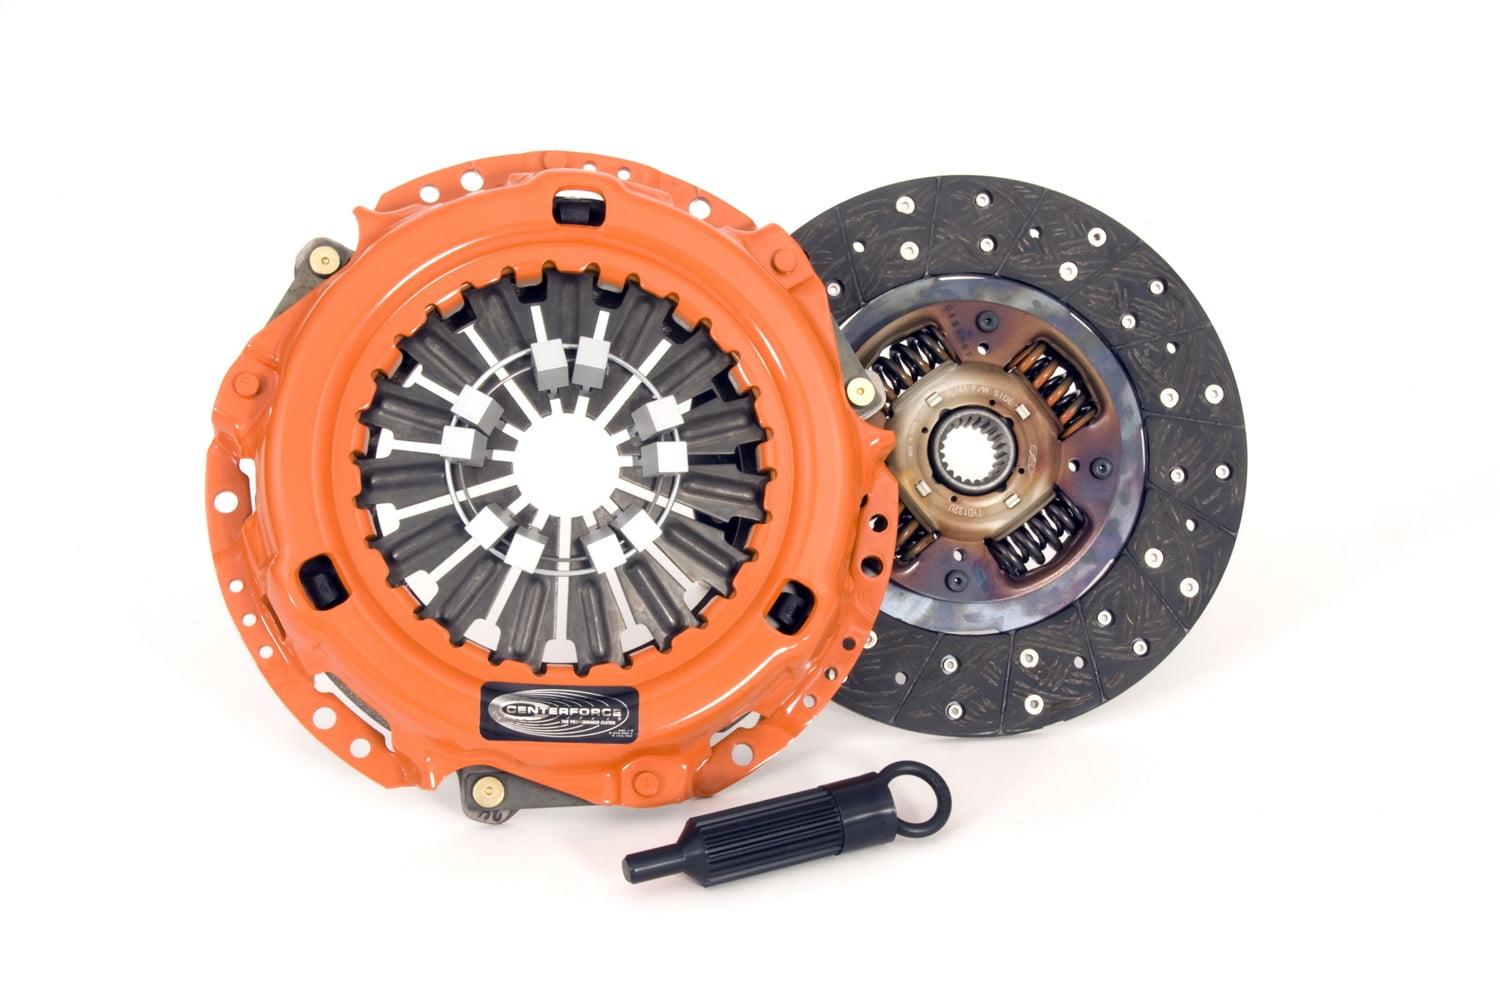 Centerforce CFT240098 Centerforce II Clutch Pressure Plate and Disc 